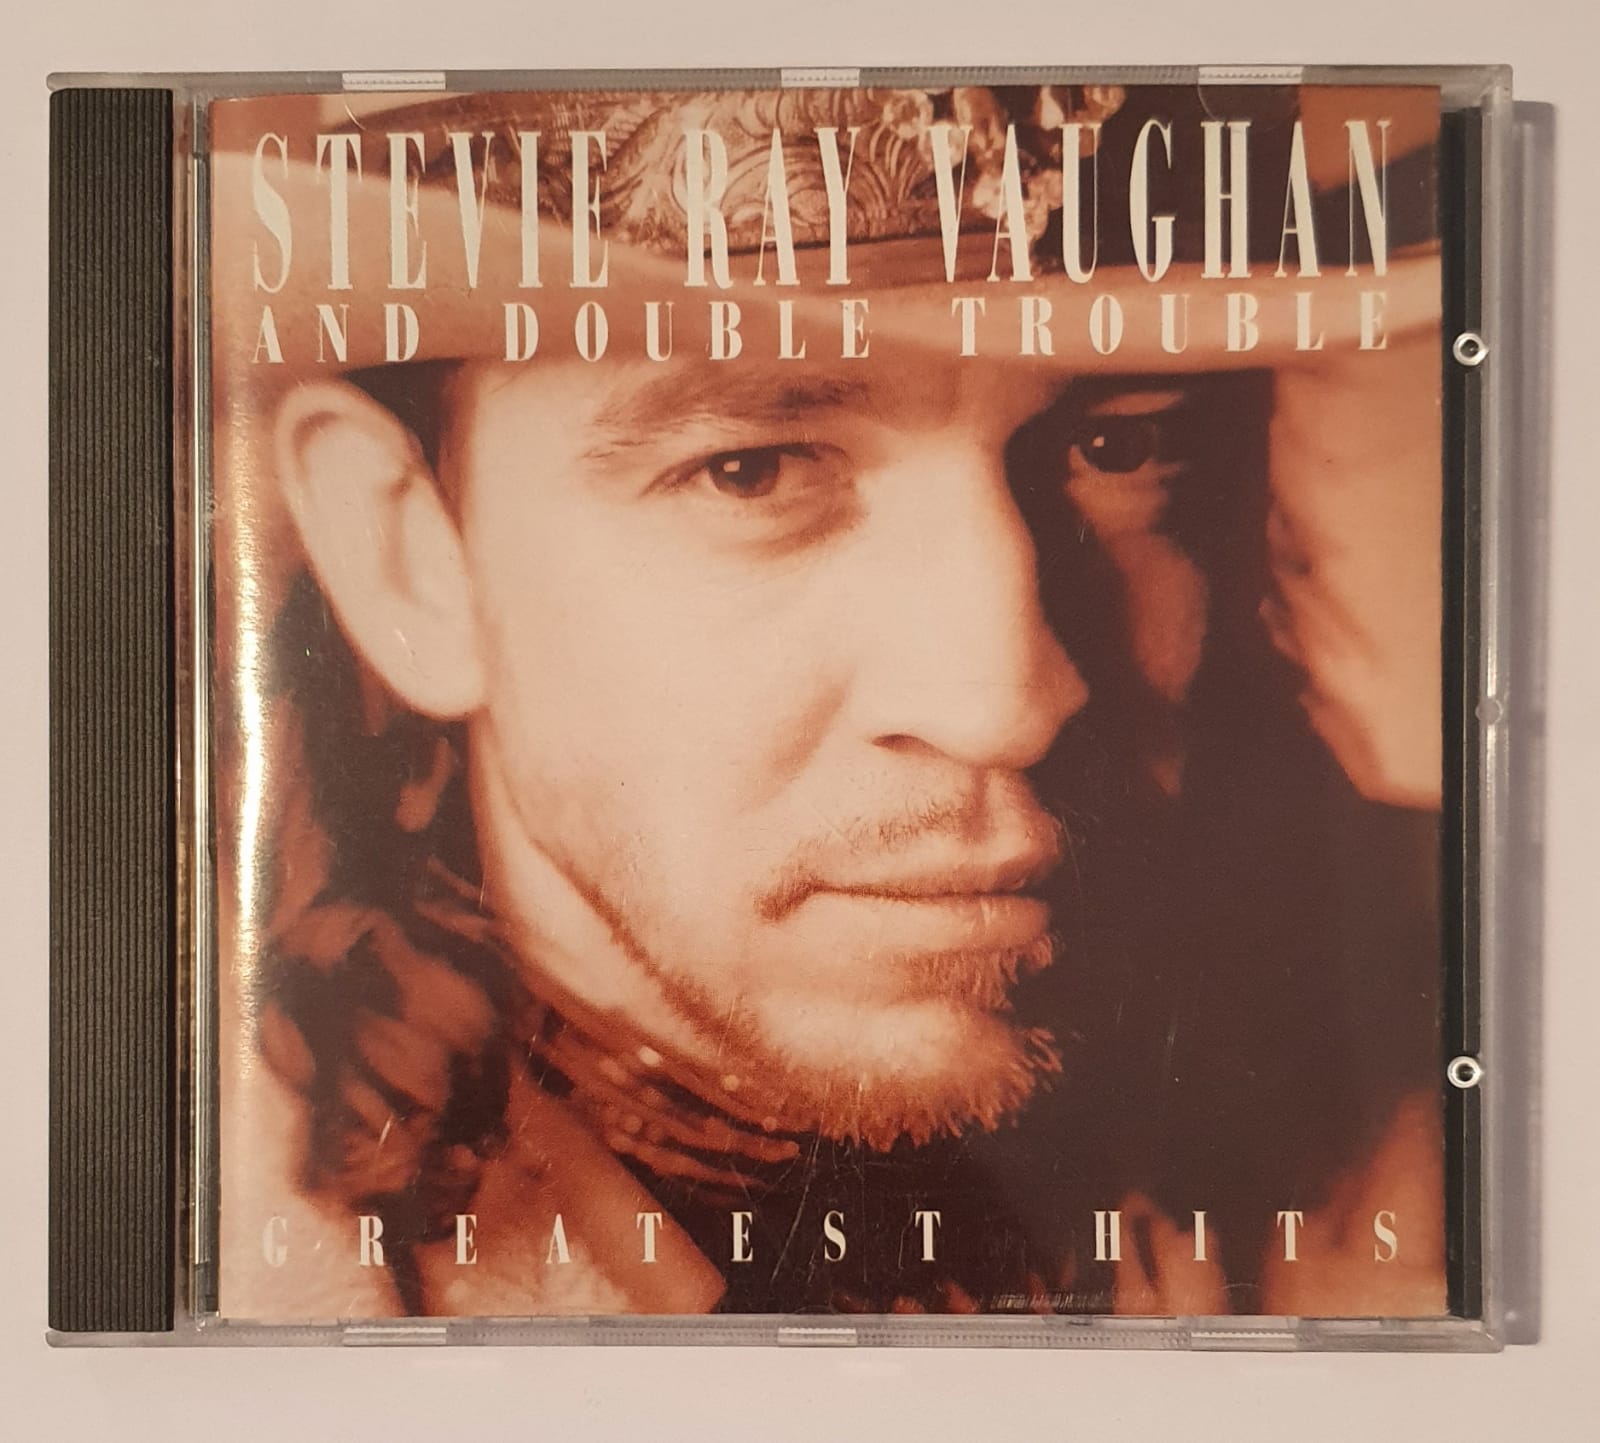 CD Stevie Ray Vaughan and Double Trouble - Greatest Hits